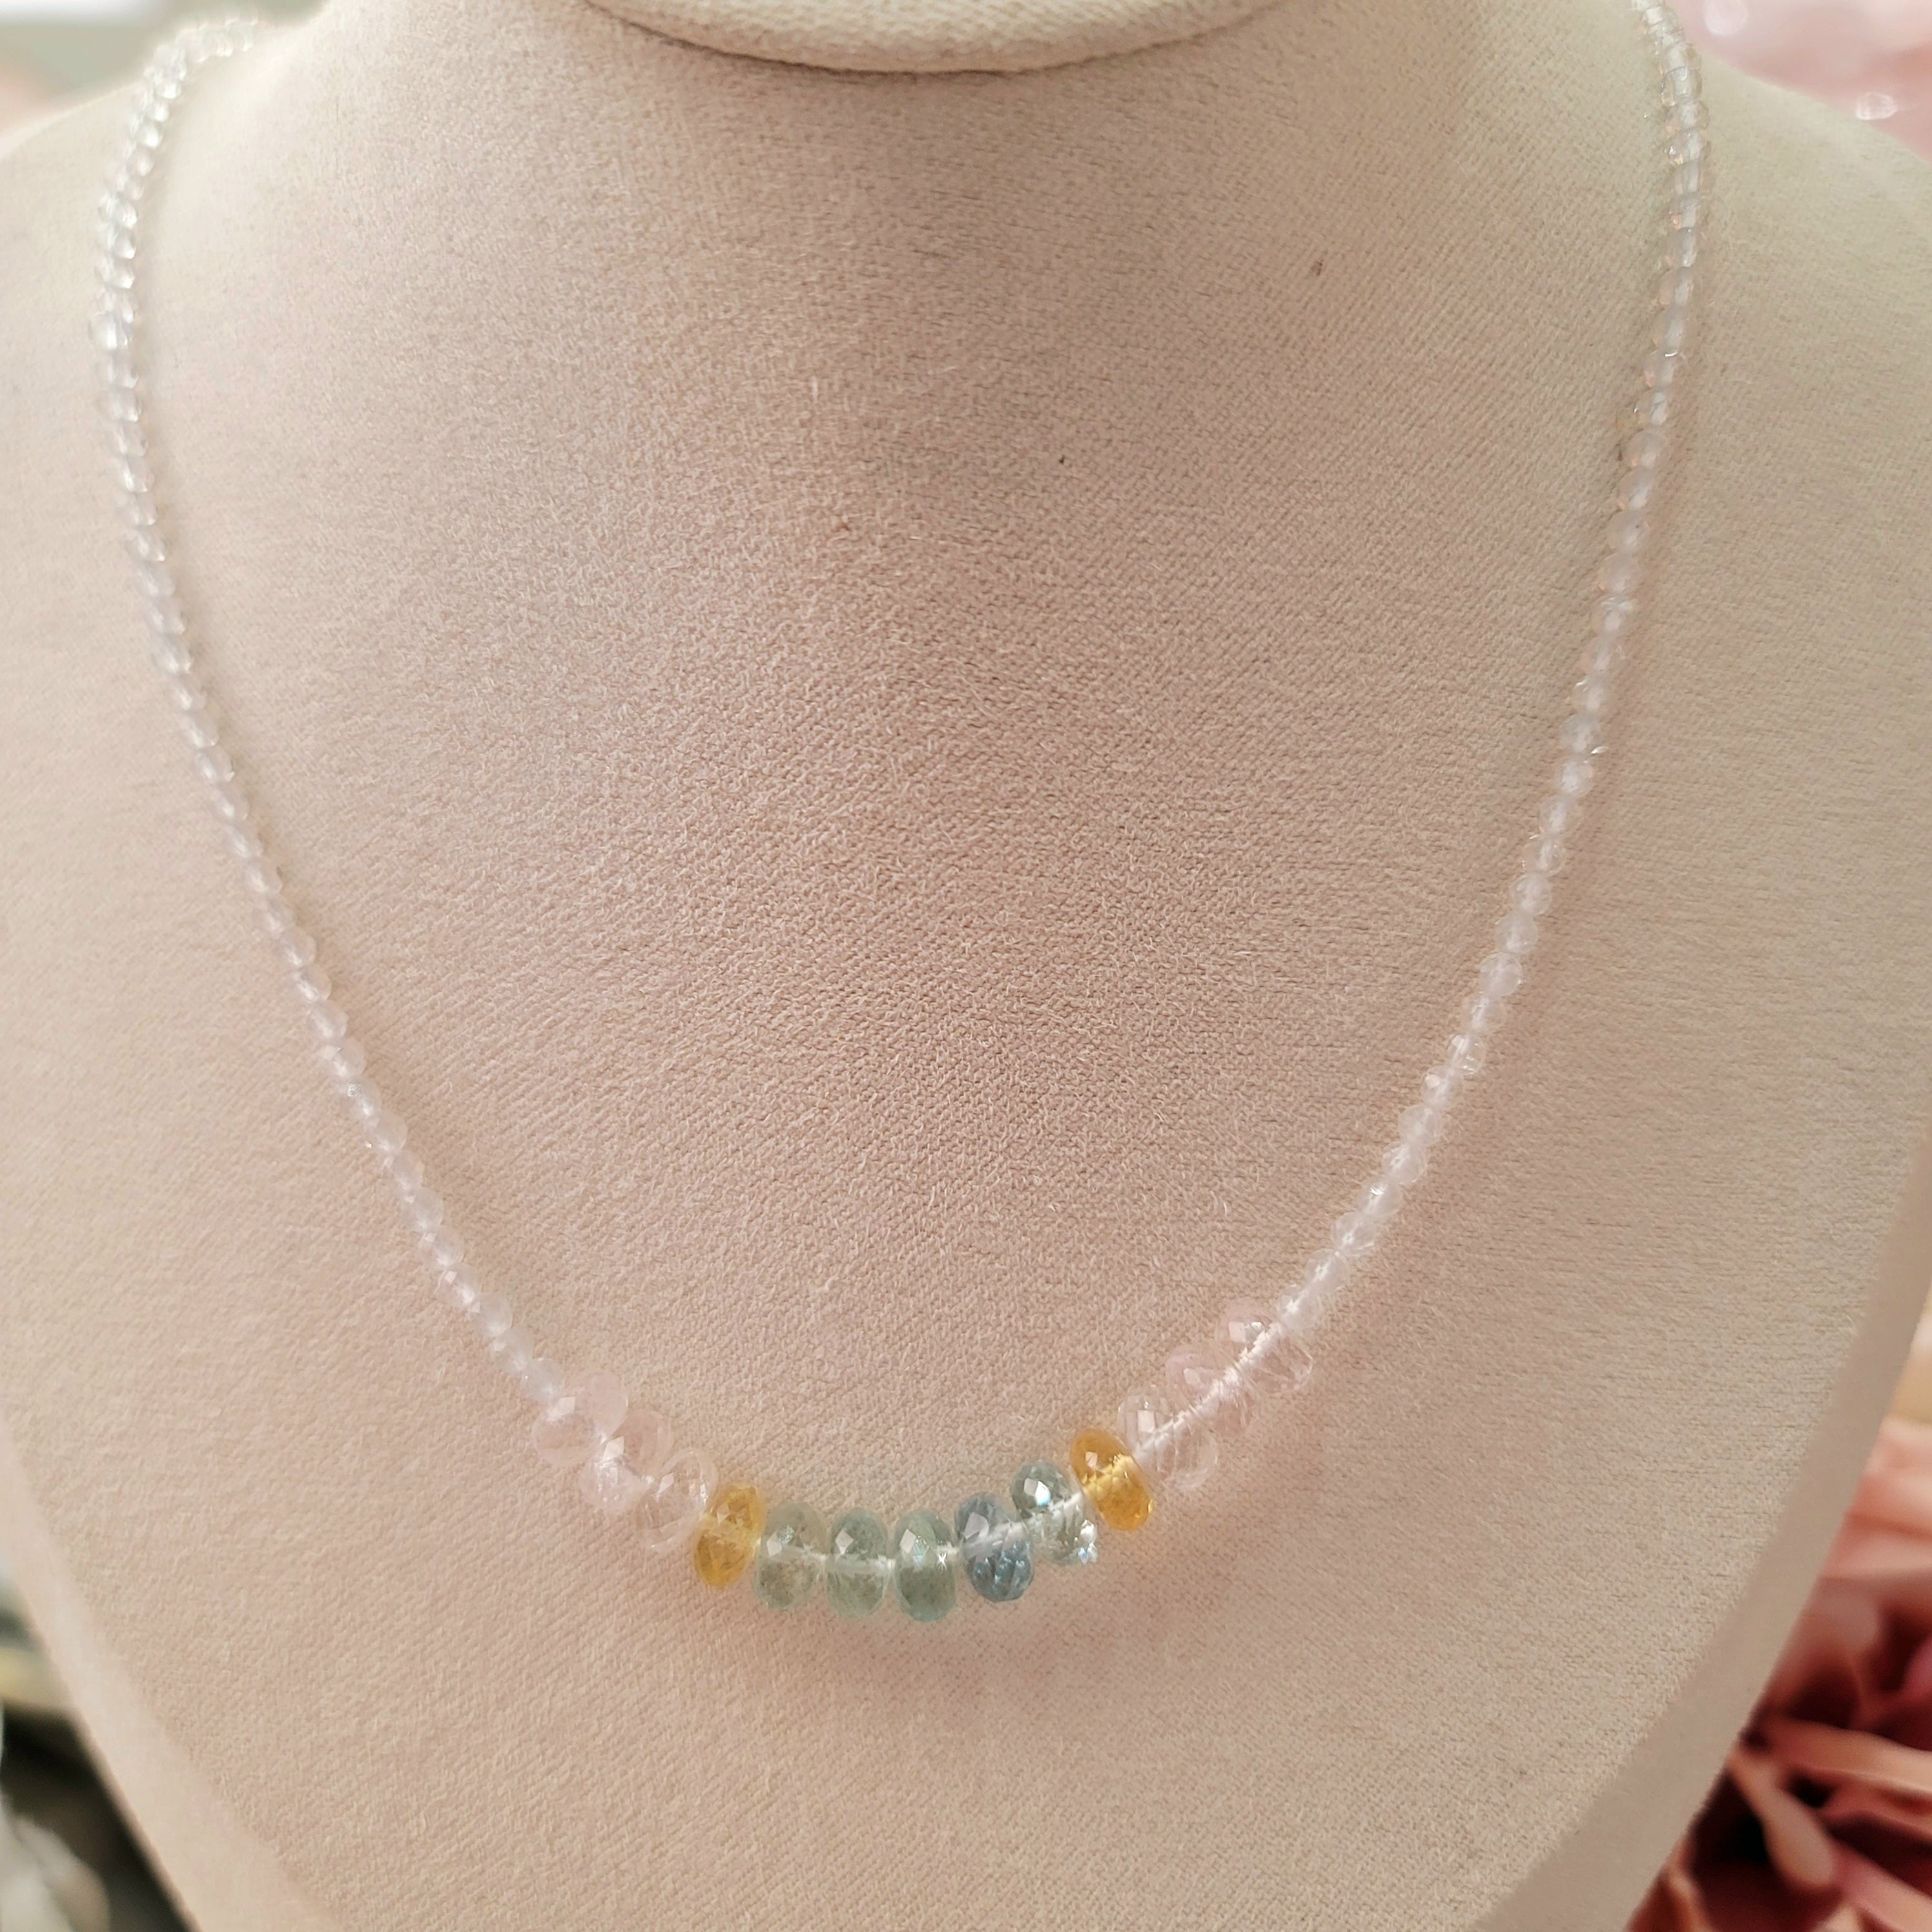 White Topaz With Beryls Micro Faceted Necklace for Hope and Positivity